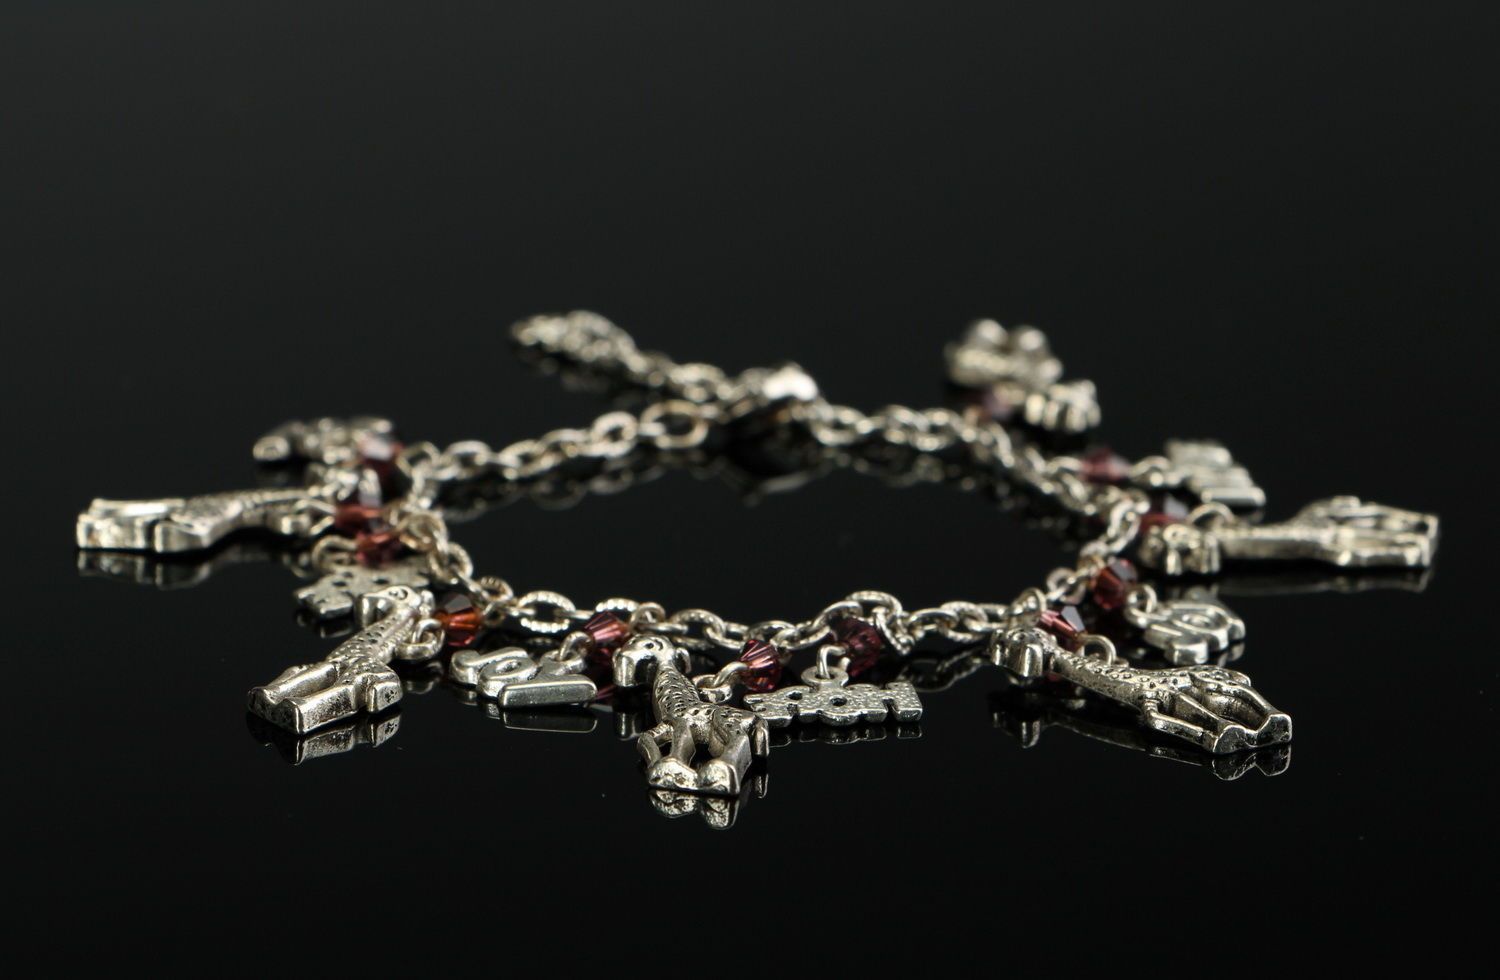 Chain bracelet with giraffes, steel and glass beads photo 2